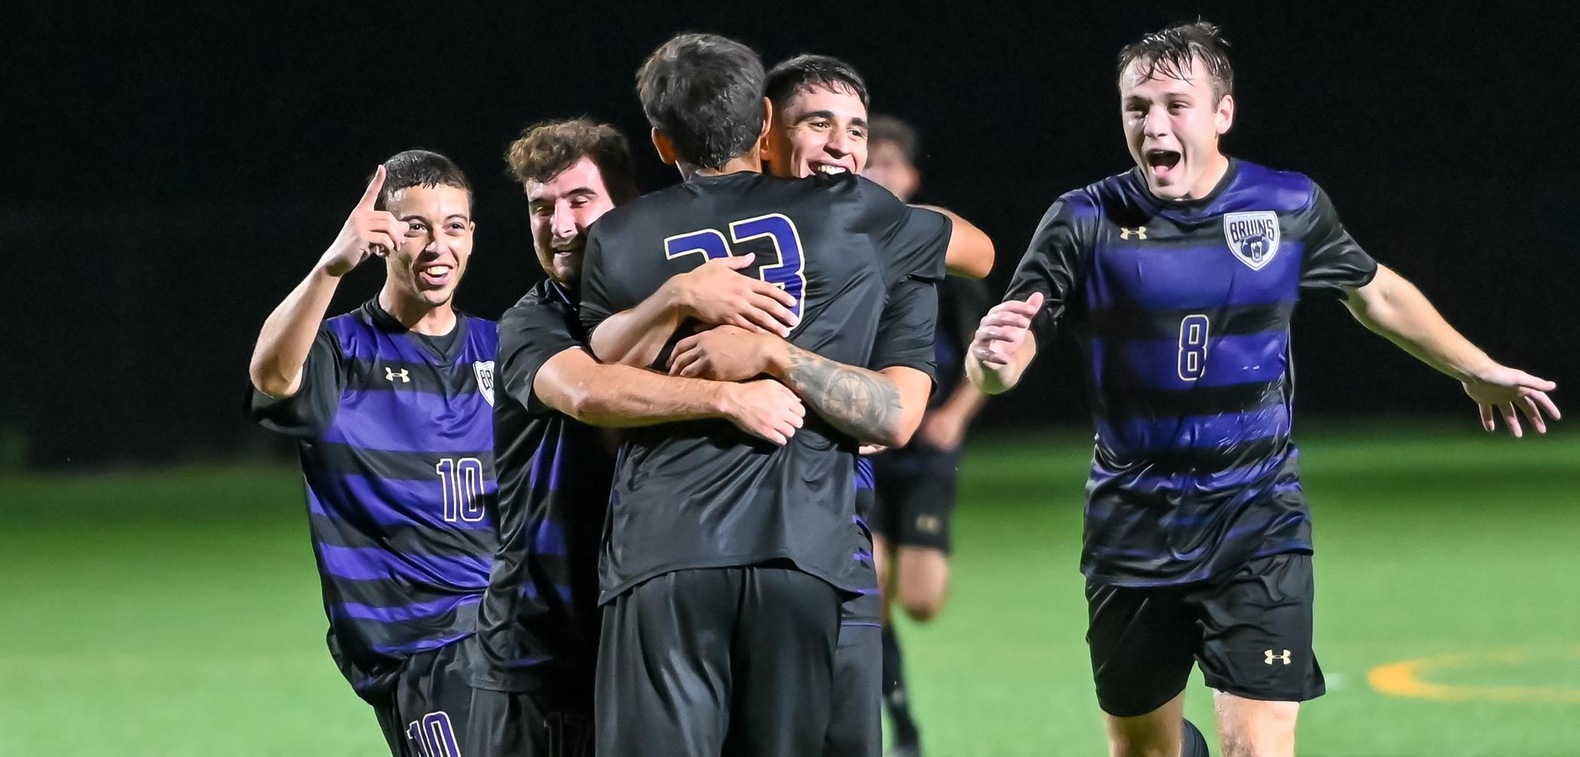 Guilherme Alencar is met by his teammates after scoring an insurance goal to put BU up 3-1 on Wednesday.